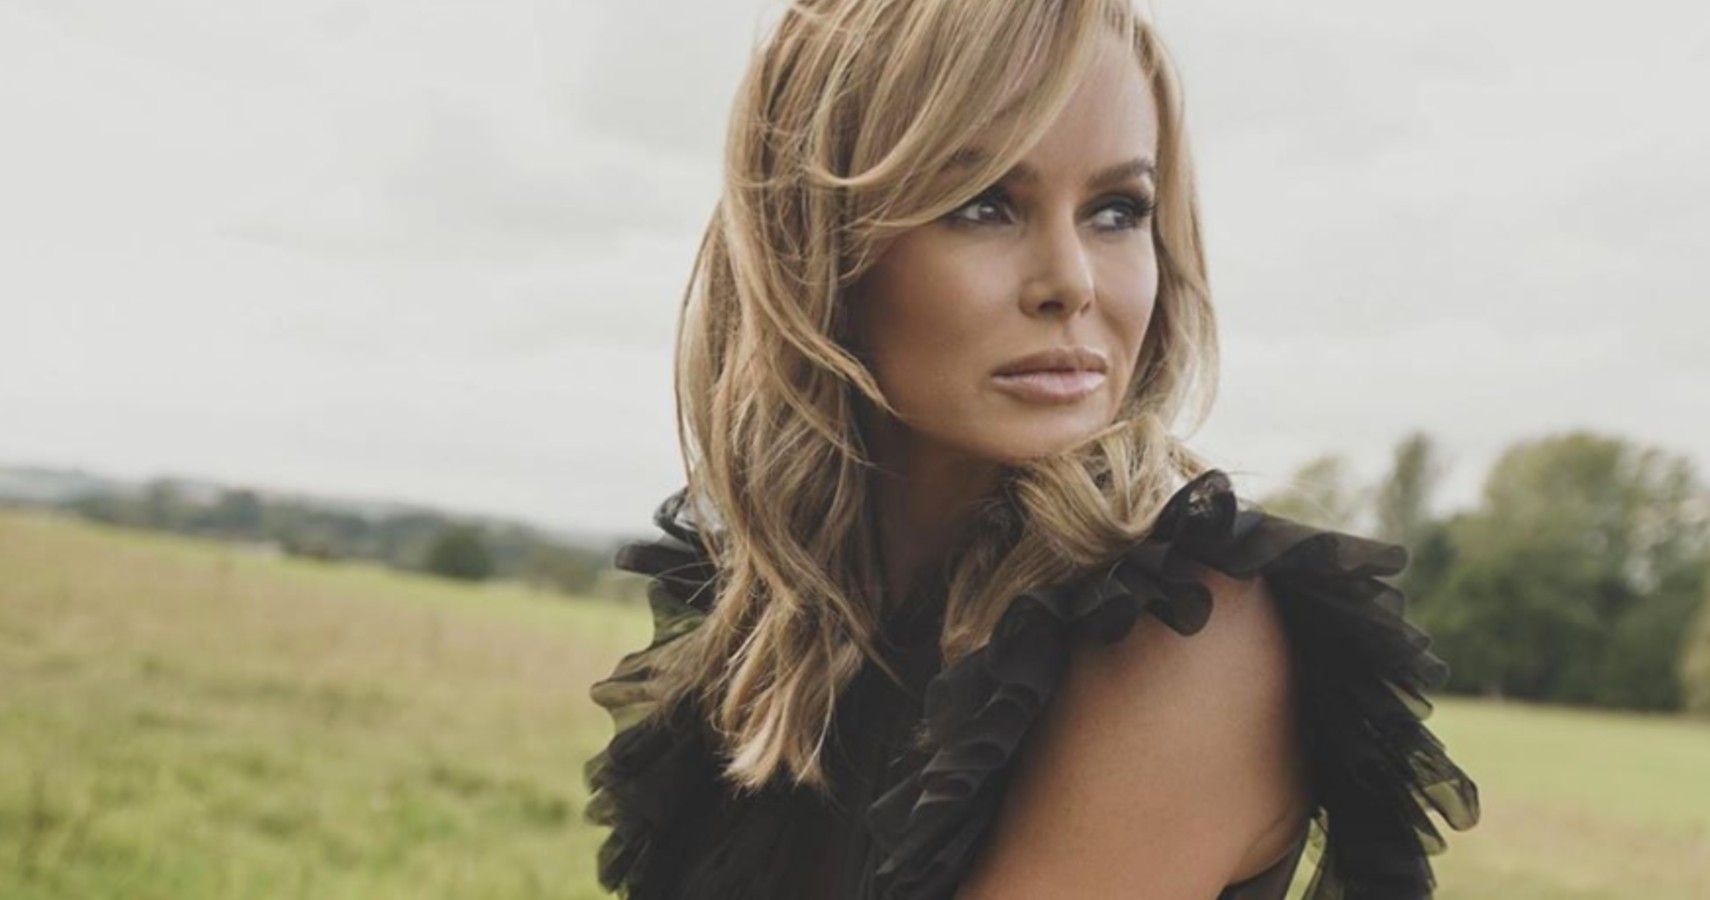 Amanda Holden lost a pregnancy at 7 months.